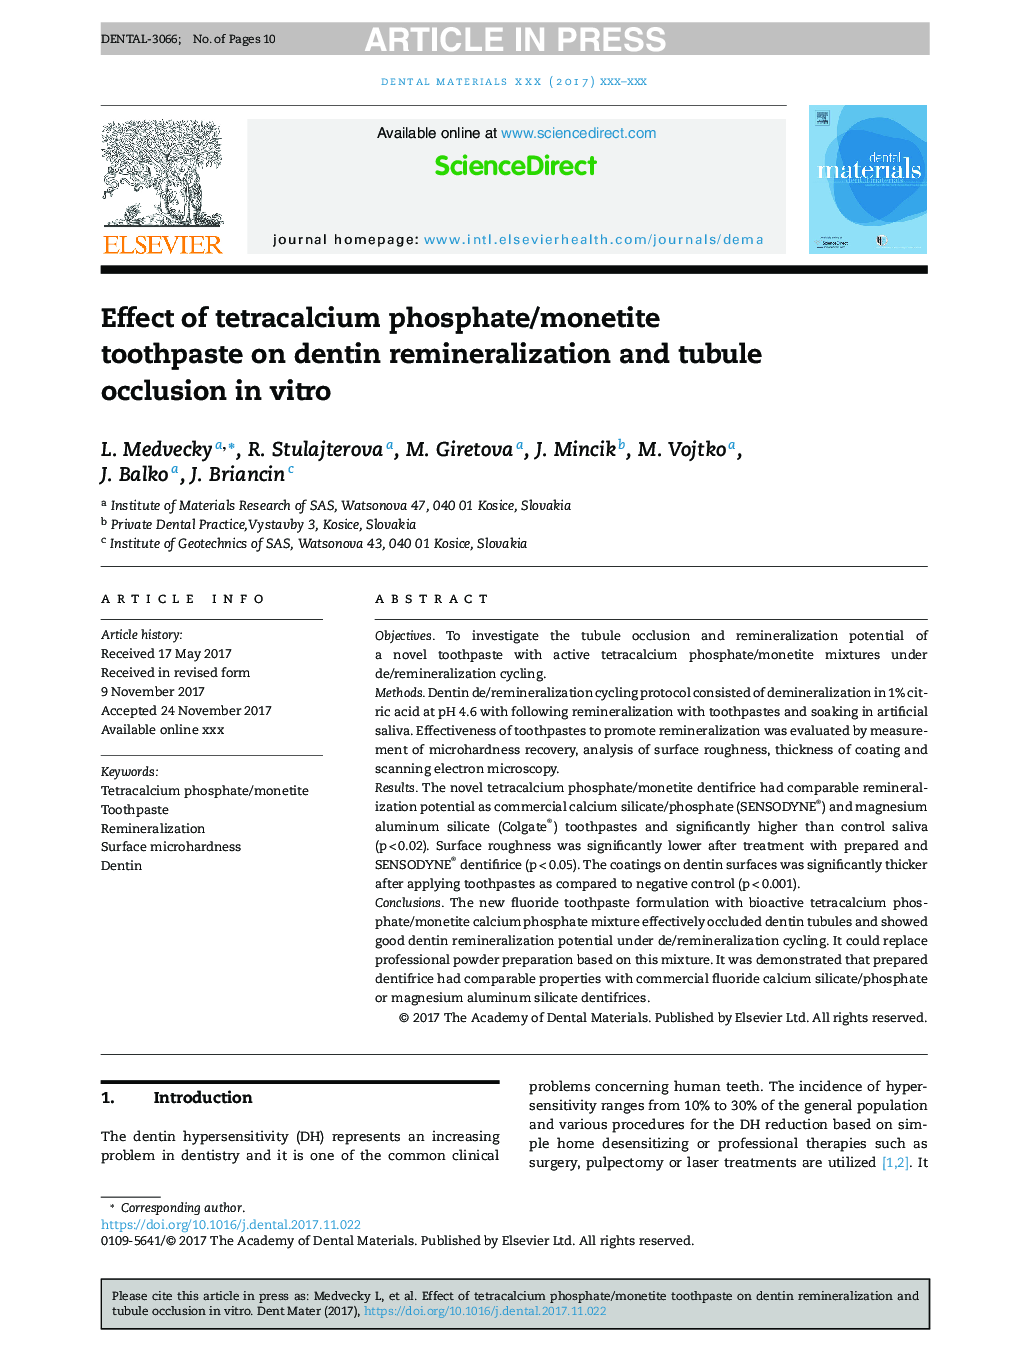 Effect of tetracalcium phosphate/monetite toothpaste on dentin remineralization and tubule occlusion in vitro